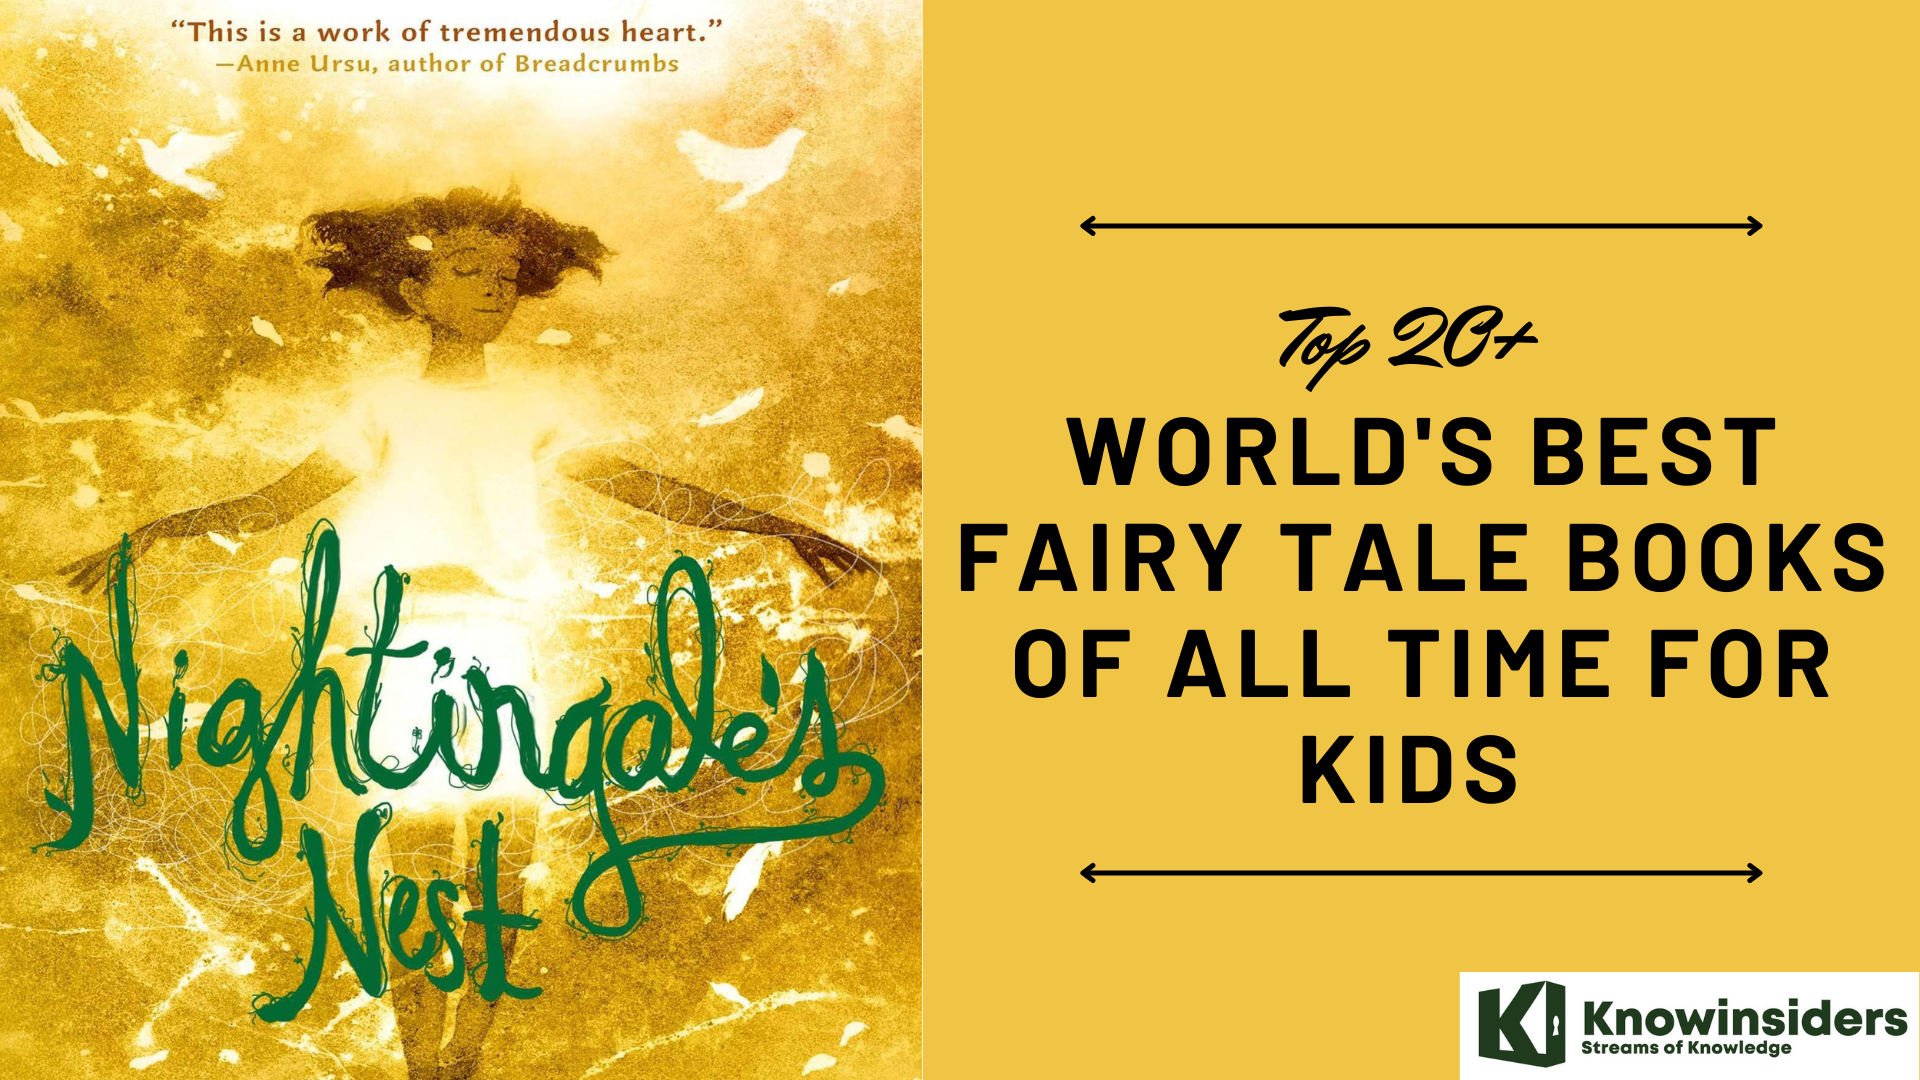 Top 20+ World's Best Fairy Tale Books for Kids Of All Time